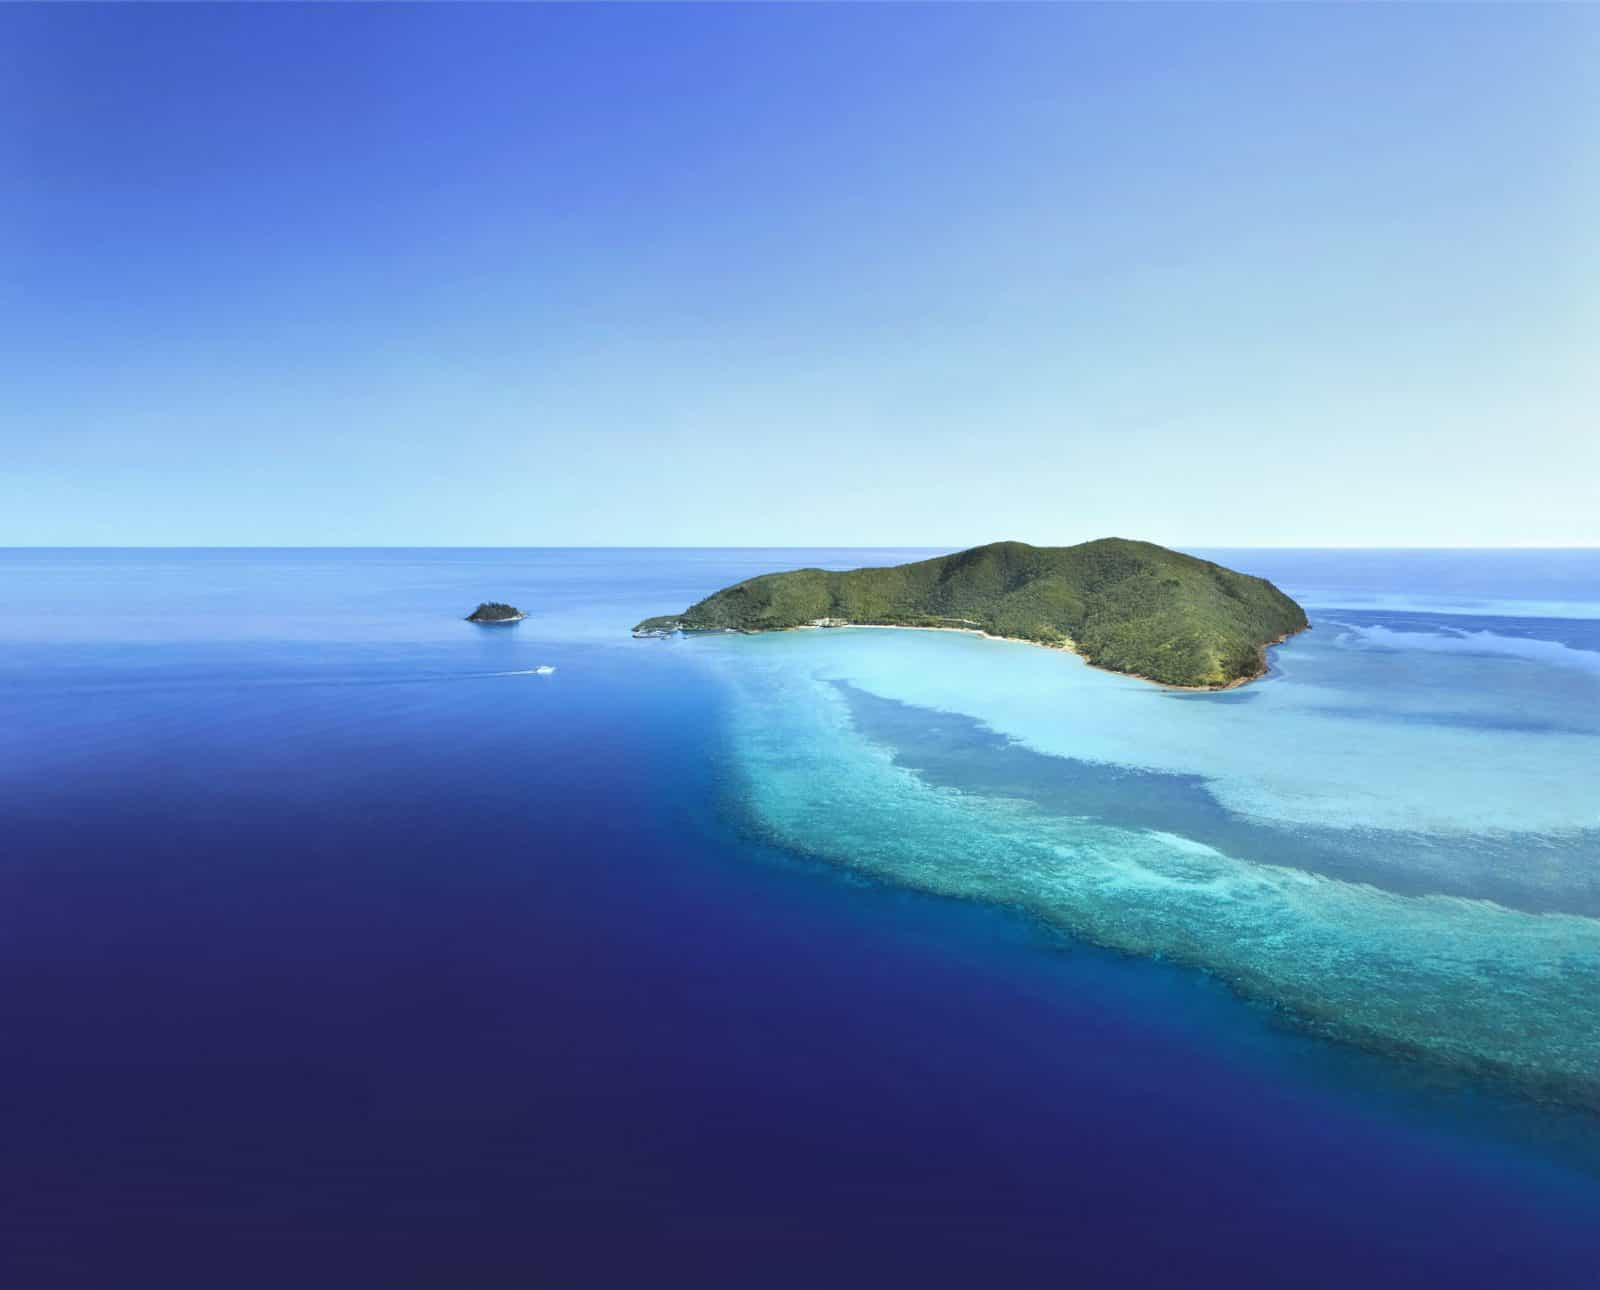 One&Only Hayman Island, in the heart of the Great Barrier Reef presents astonishing natural beauty, restorative peace, indulgence and adventure.